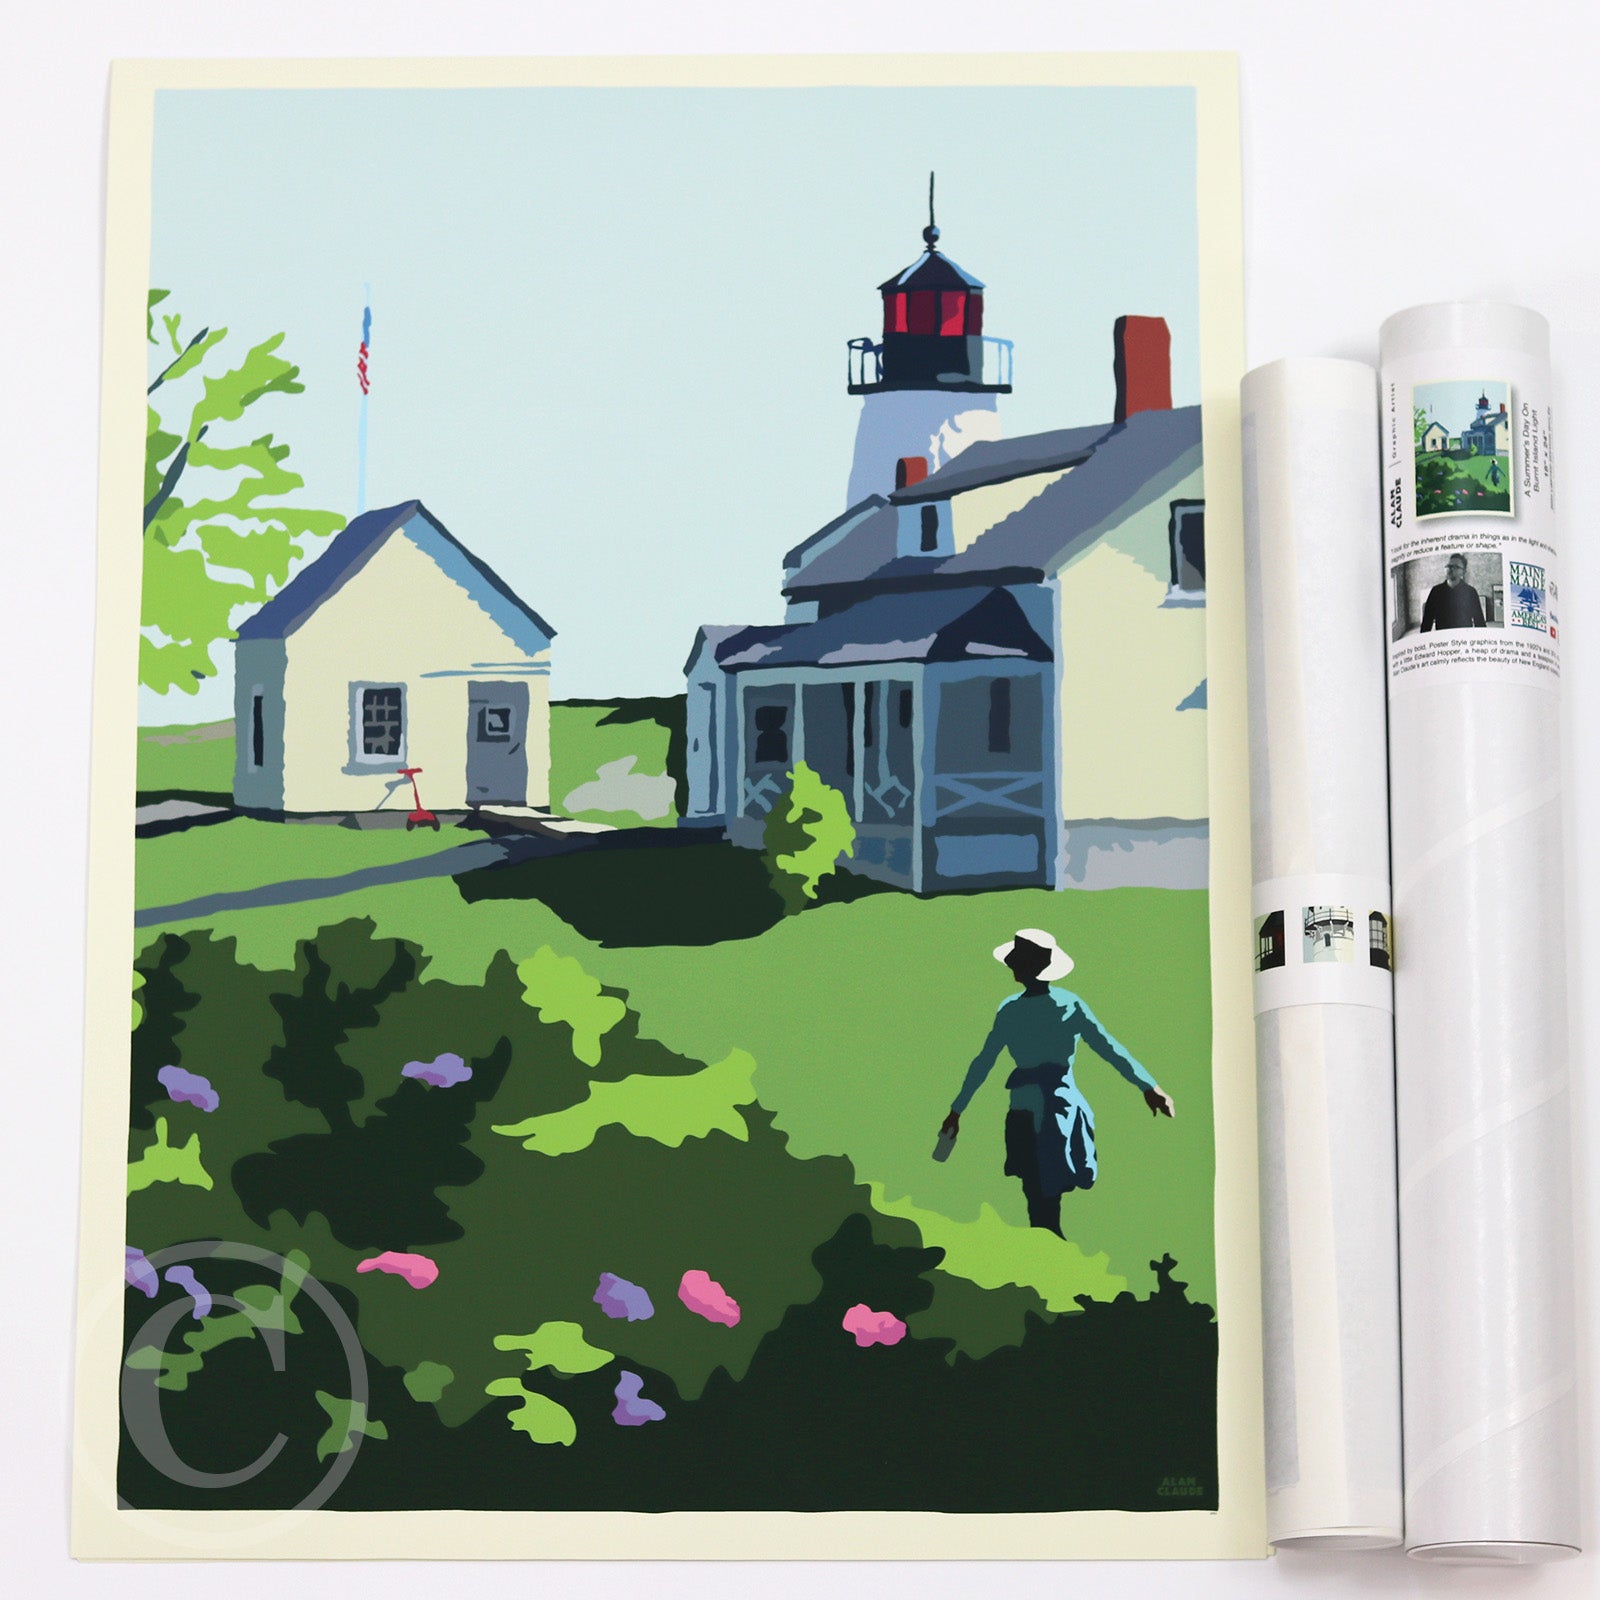 A Summer's Day on Burnt Island Light Art Print 18" x 24" Wall Poster By Alan Claude - Maine